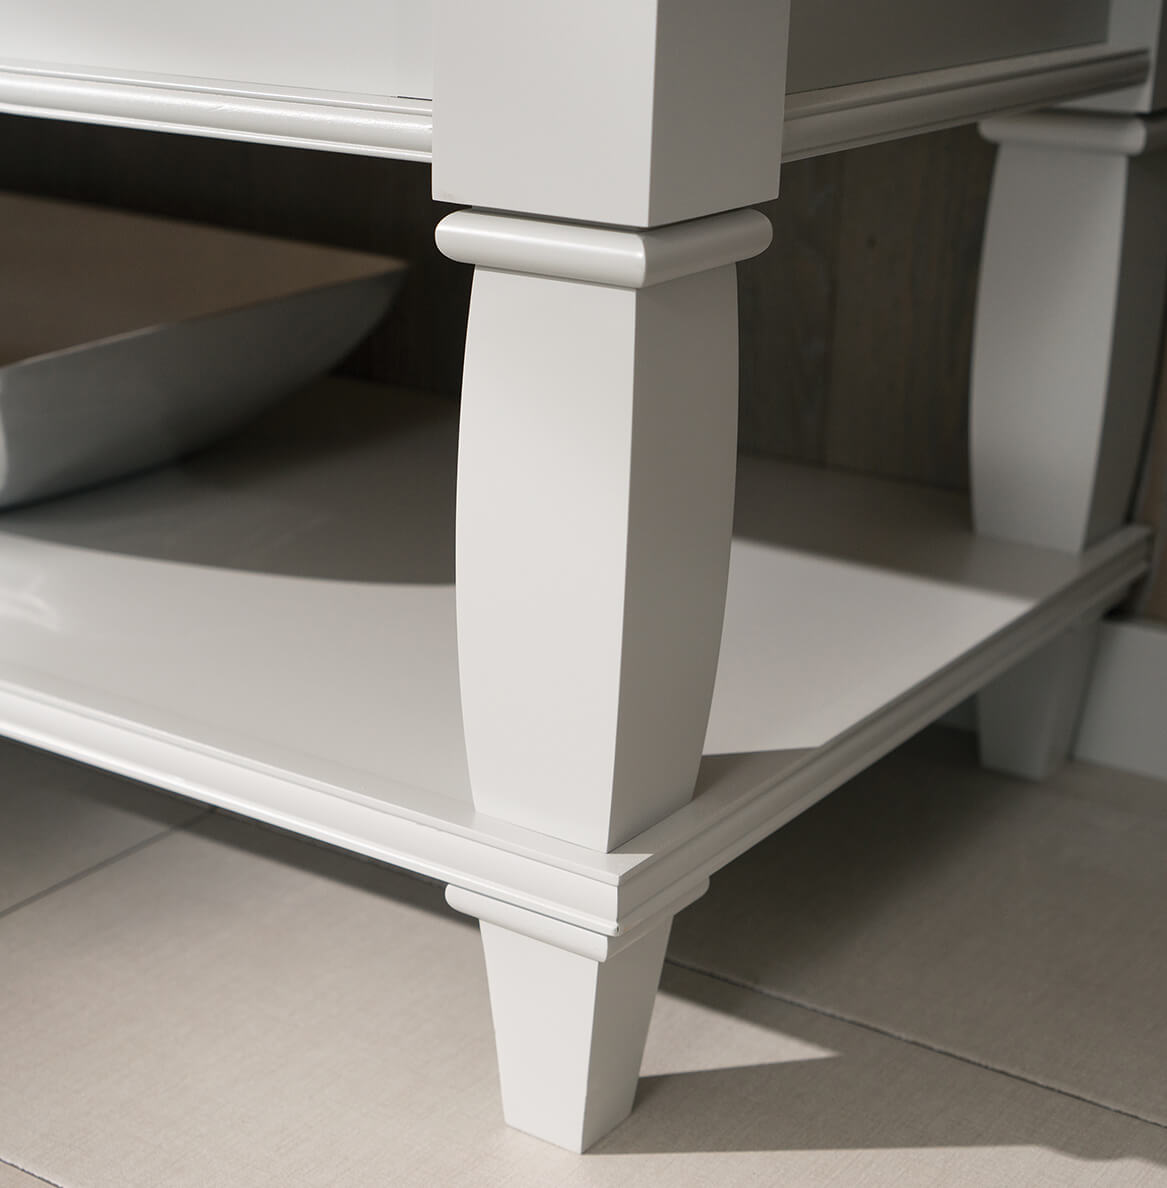 A close up of the Furniture Style vanity with a delicate, transitional styled turned post leg and floor shelf.